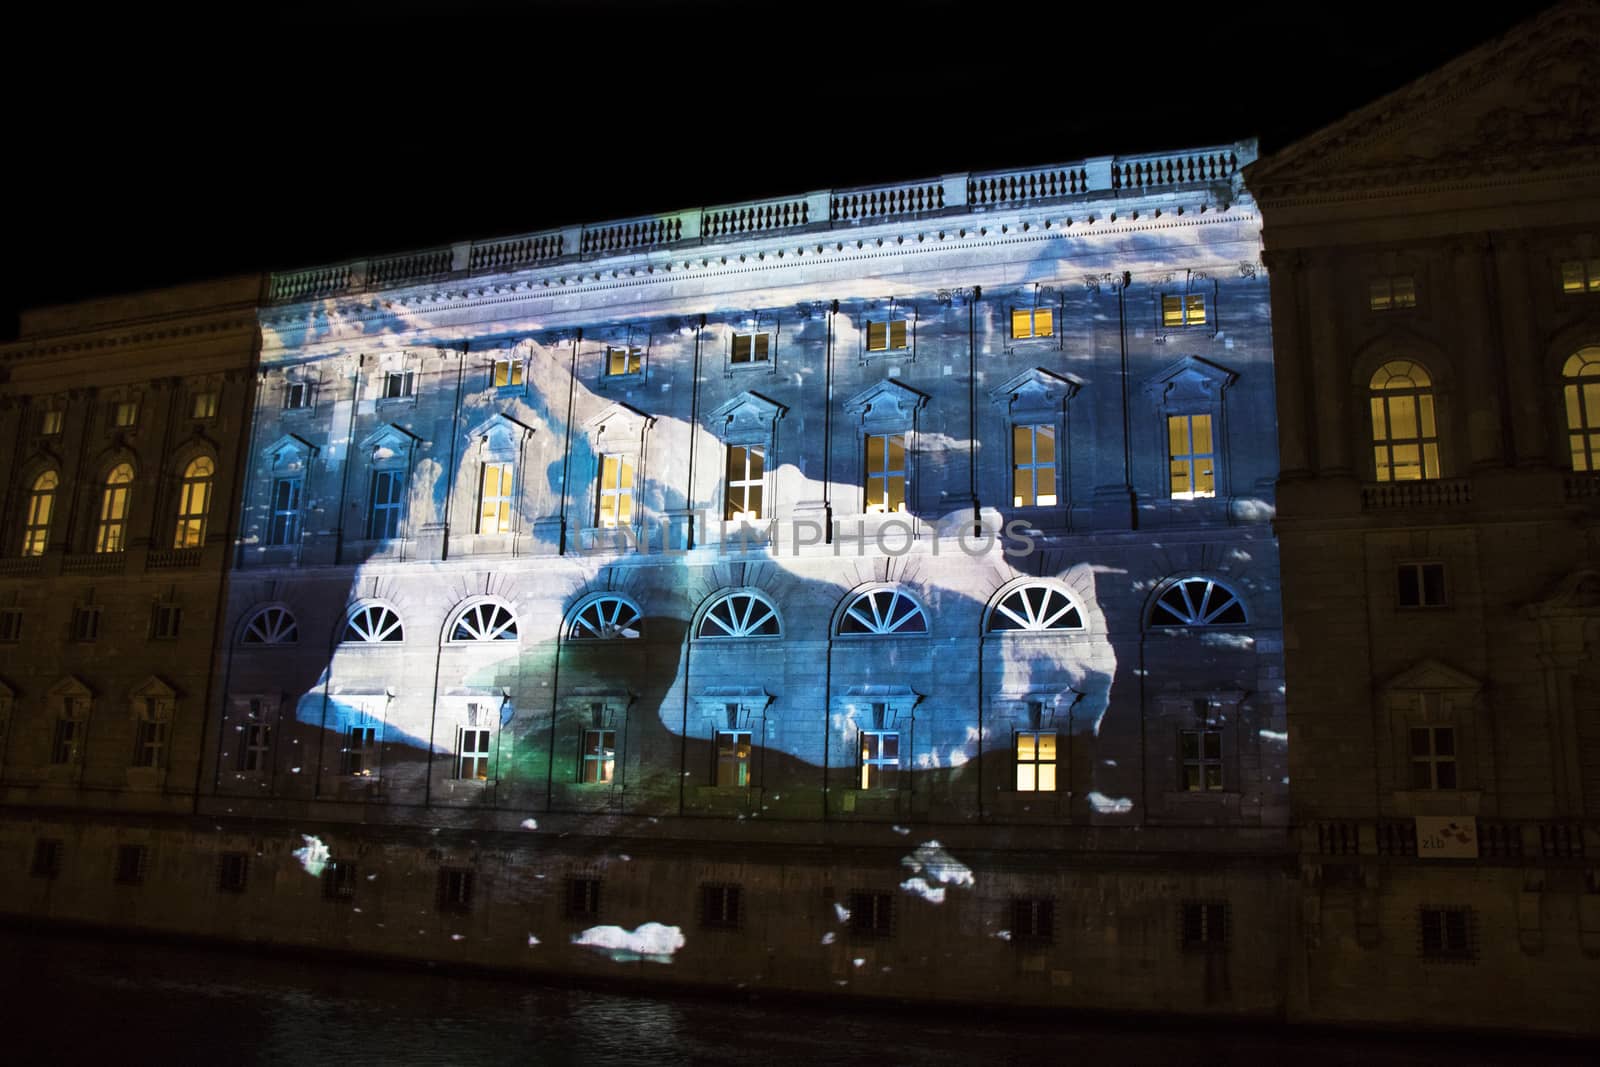 Berlin light festival in 2017 , sideshow on the buildings and landmarks,colorful lights and industrial art.Event in city center.